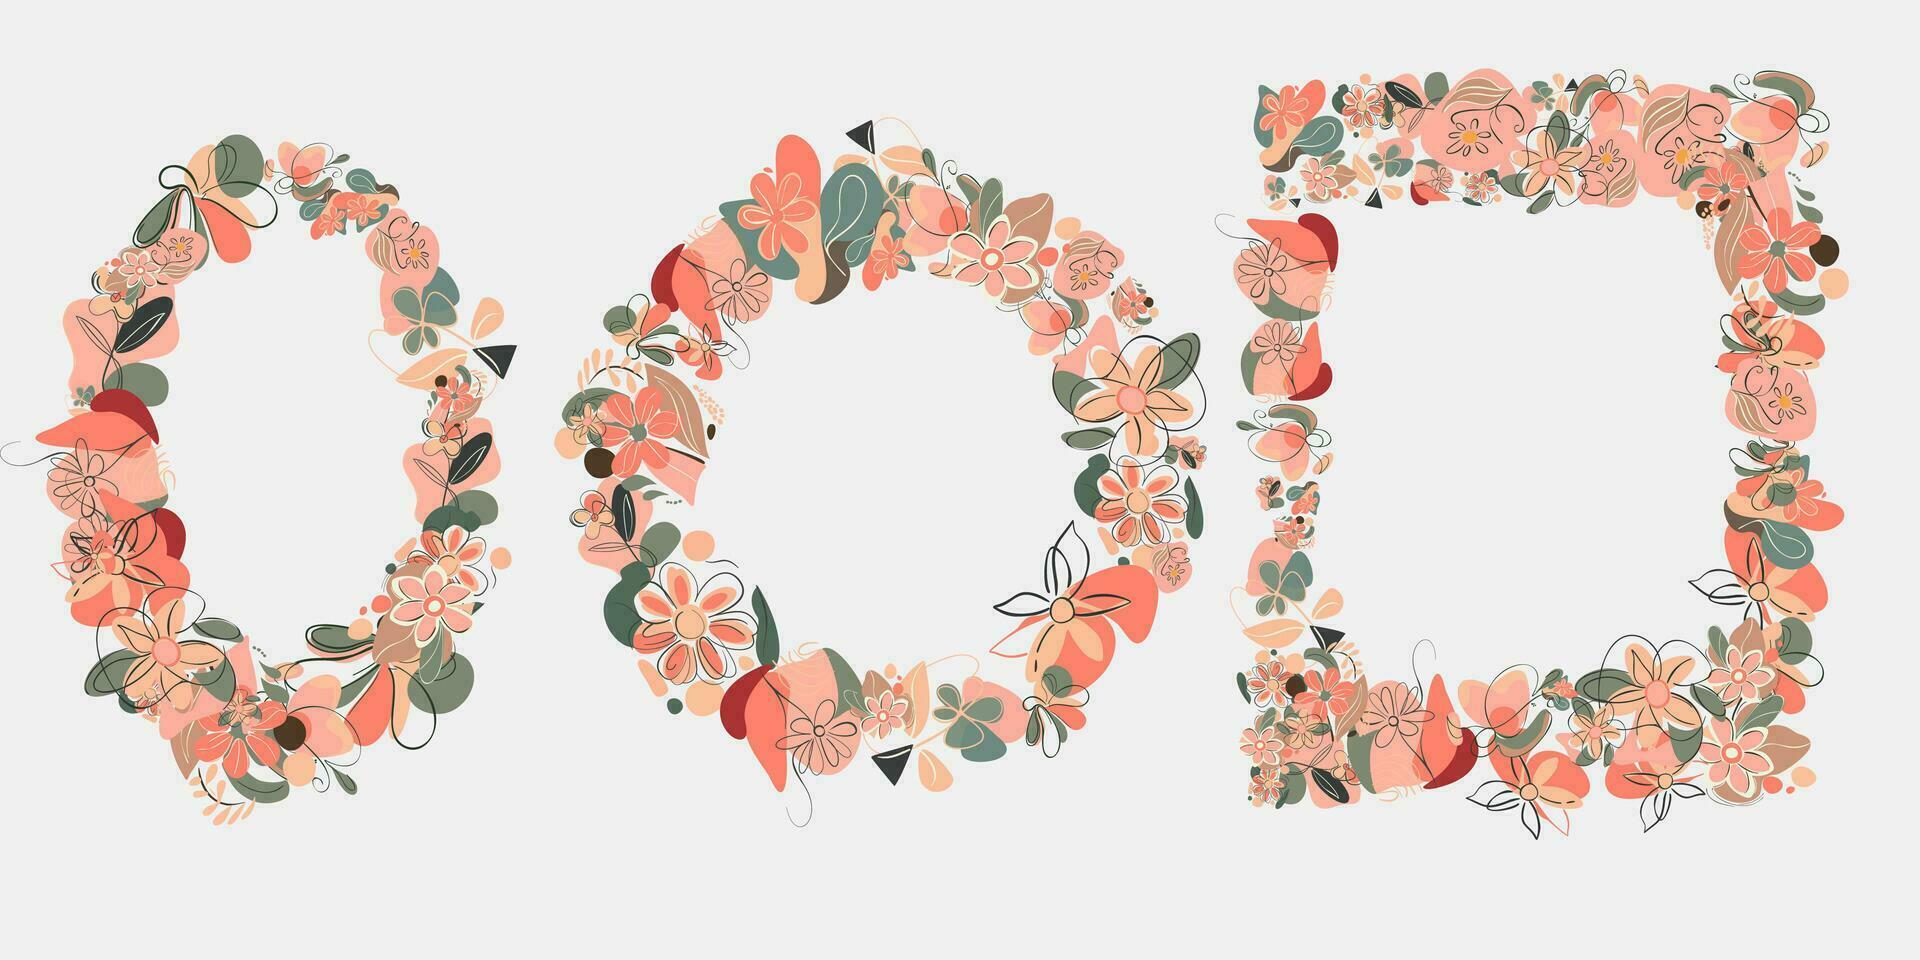 Floral Frames and Elements Graphics, Borders, and Backgrounds for Print and Design Vector Patterns, Flower and Leaf Illustrations, Templates.